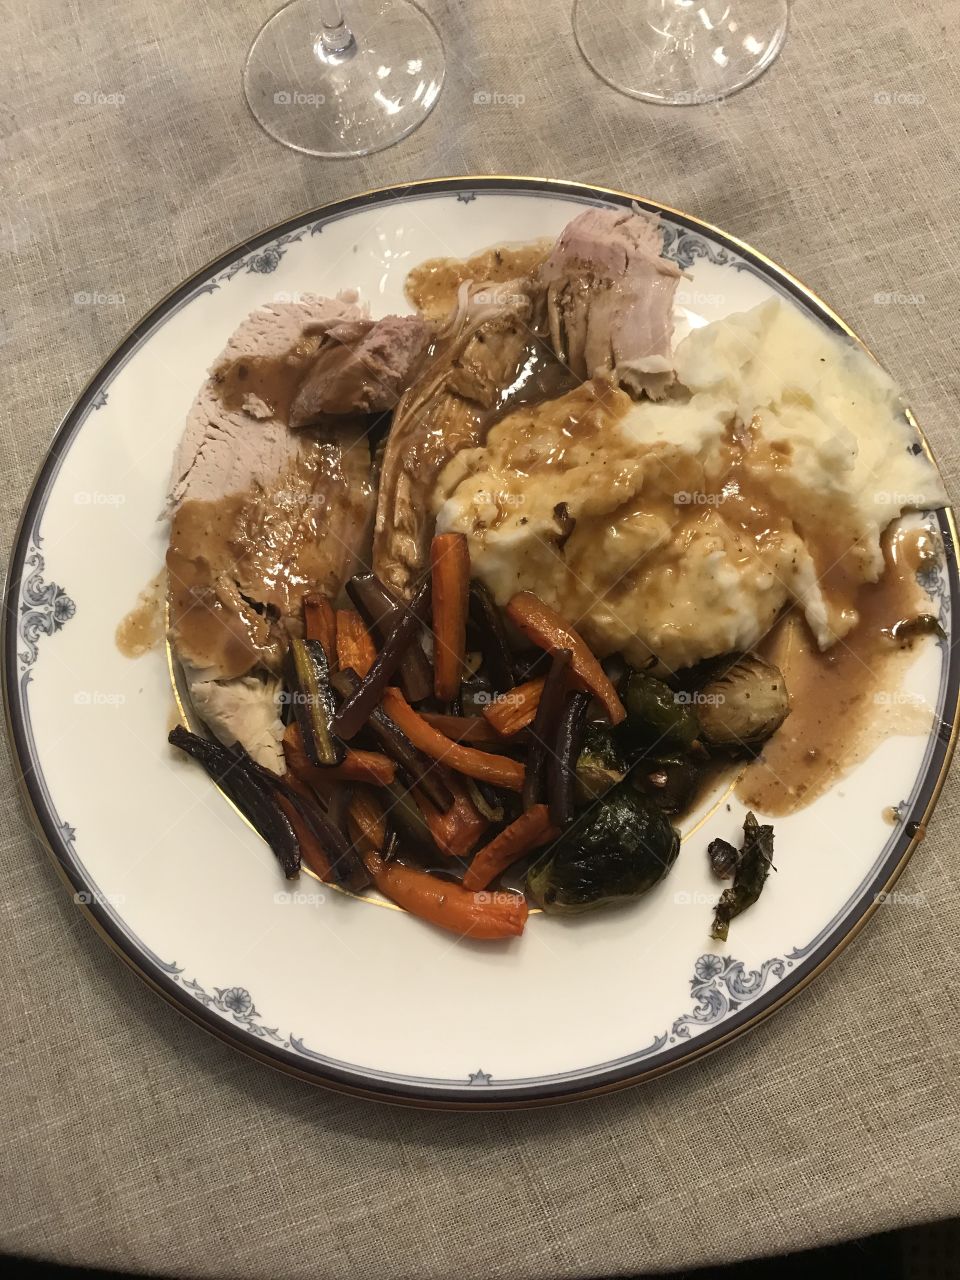 Thanksgiving meal 